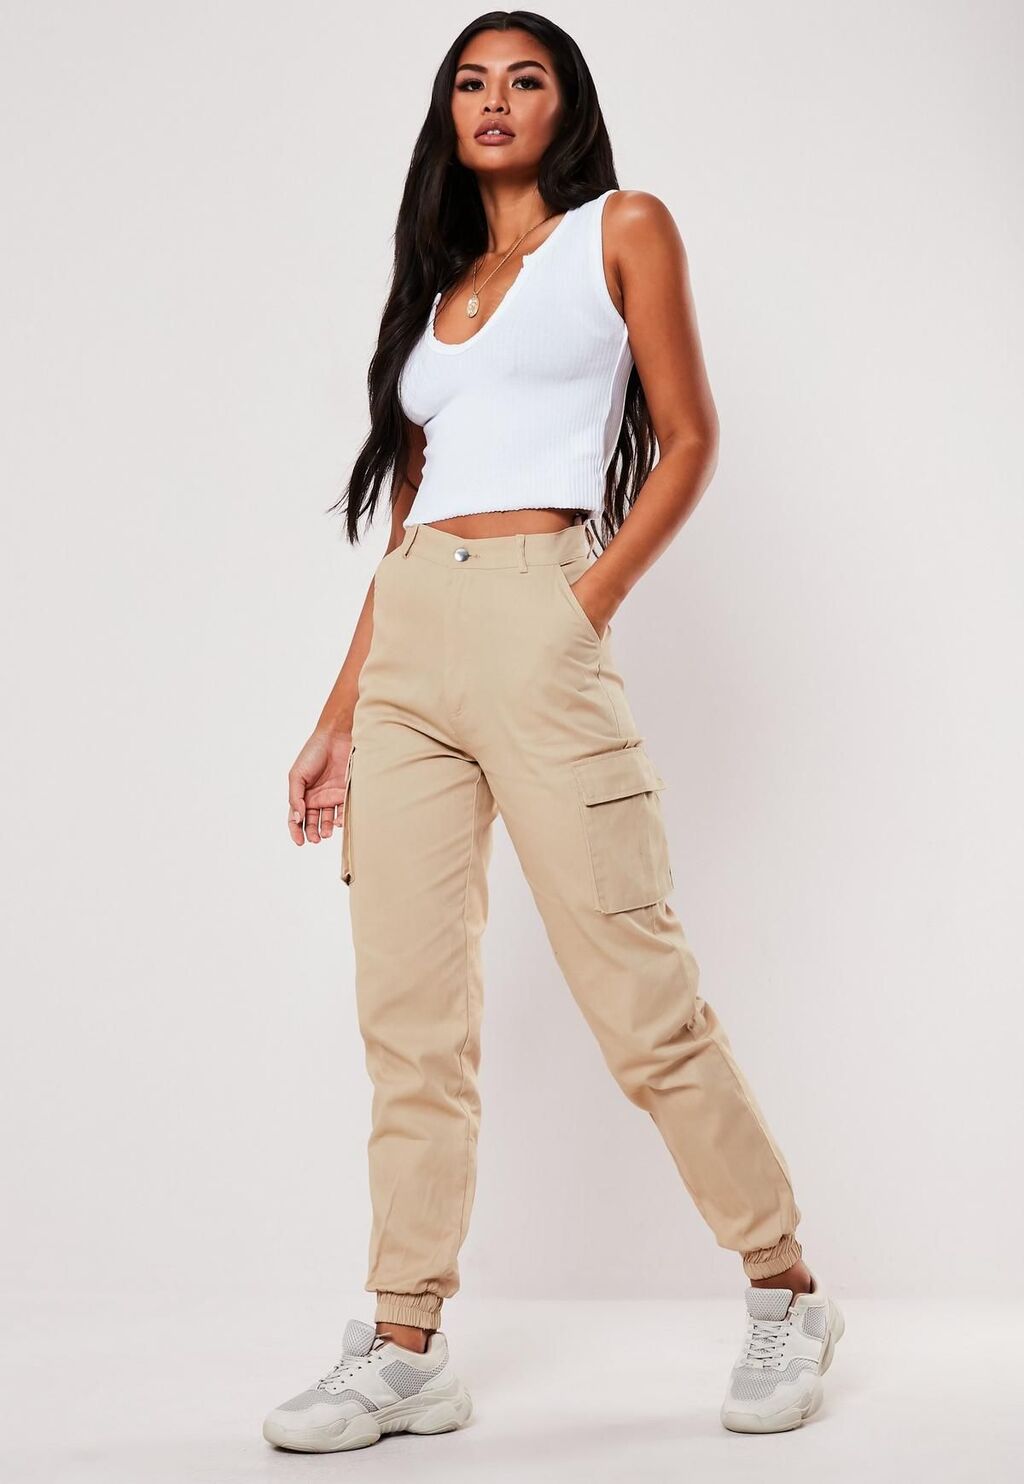 Baggy Cargo Pants for 90s theme party outfits